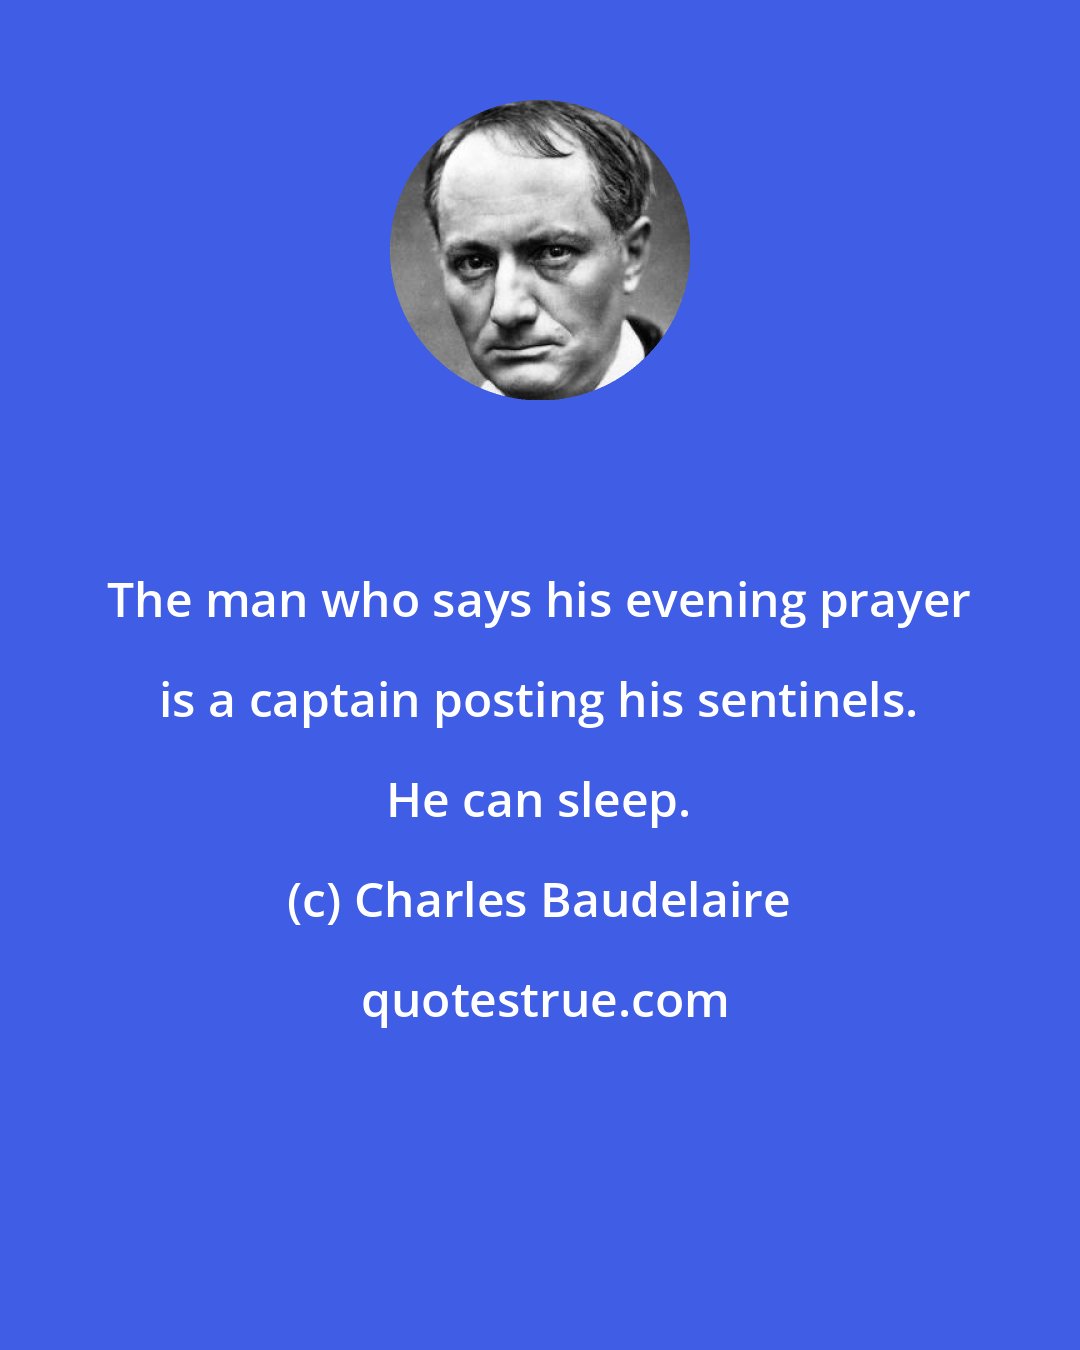 Charles Baudelaire: The man who says his evening prayer is a captain posting his sentinels. He can sleep.